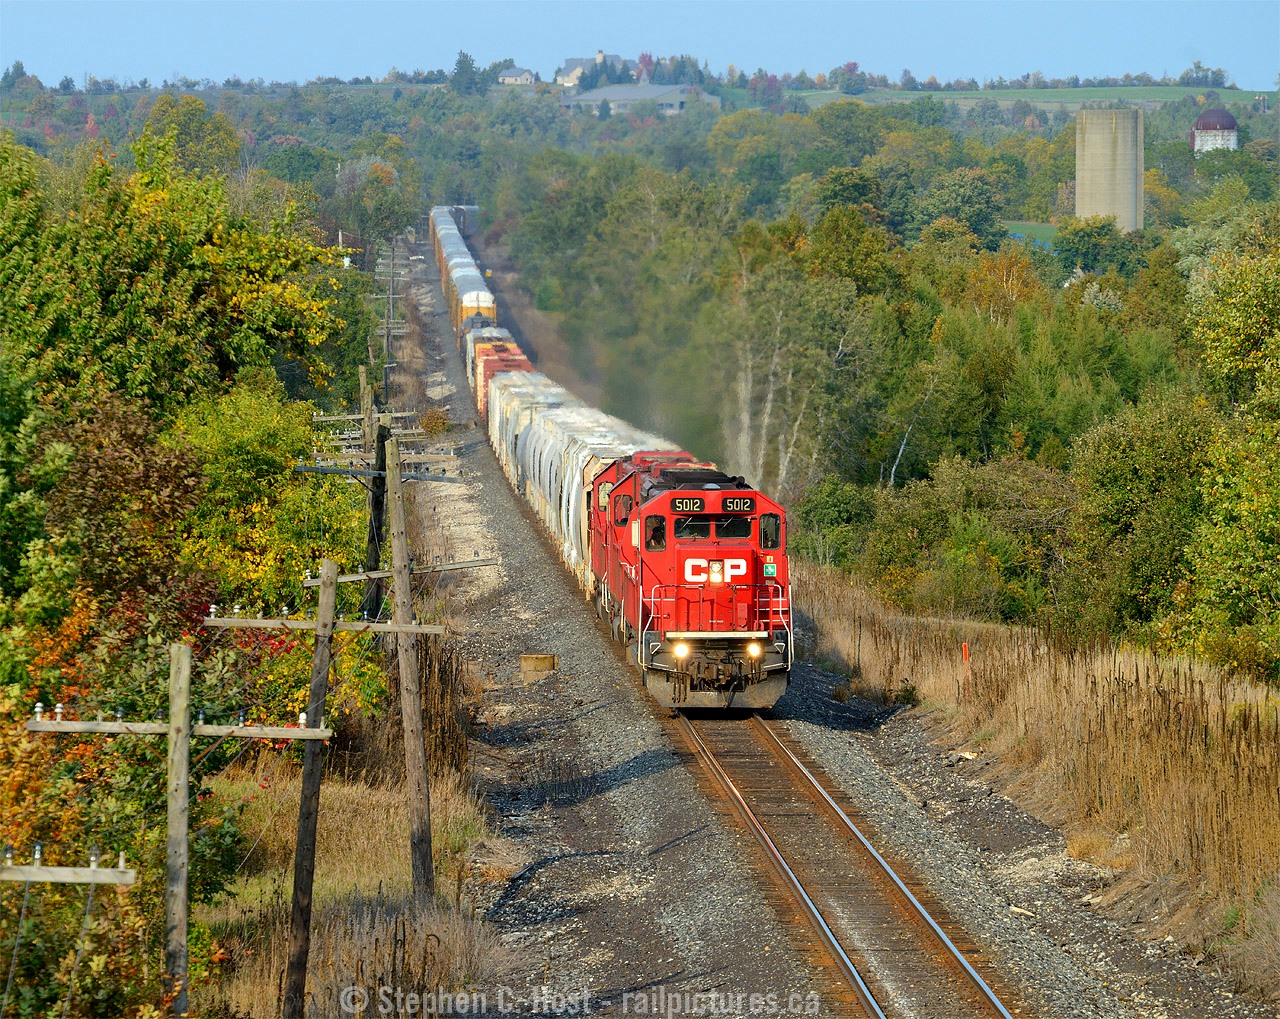 A nice after work train, about to duck under highway 6, CP 255 with a trio of EMD's is giving 'er for track speed to London. In the background is the bucolic Puslinch countryside.